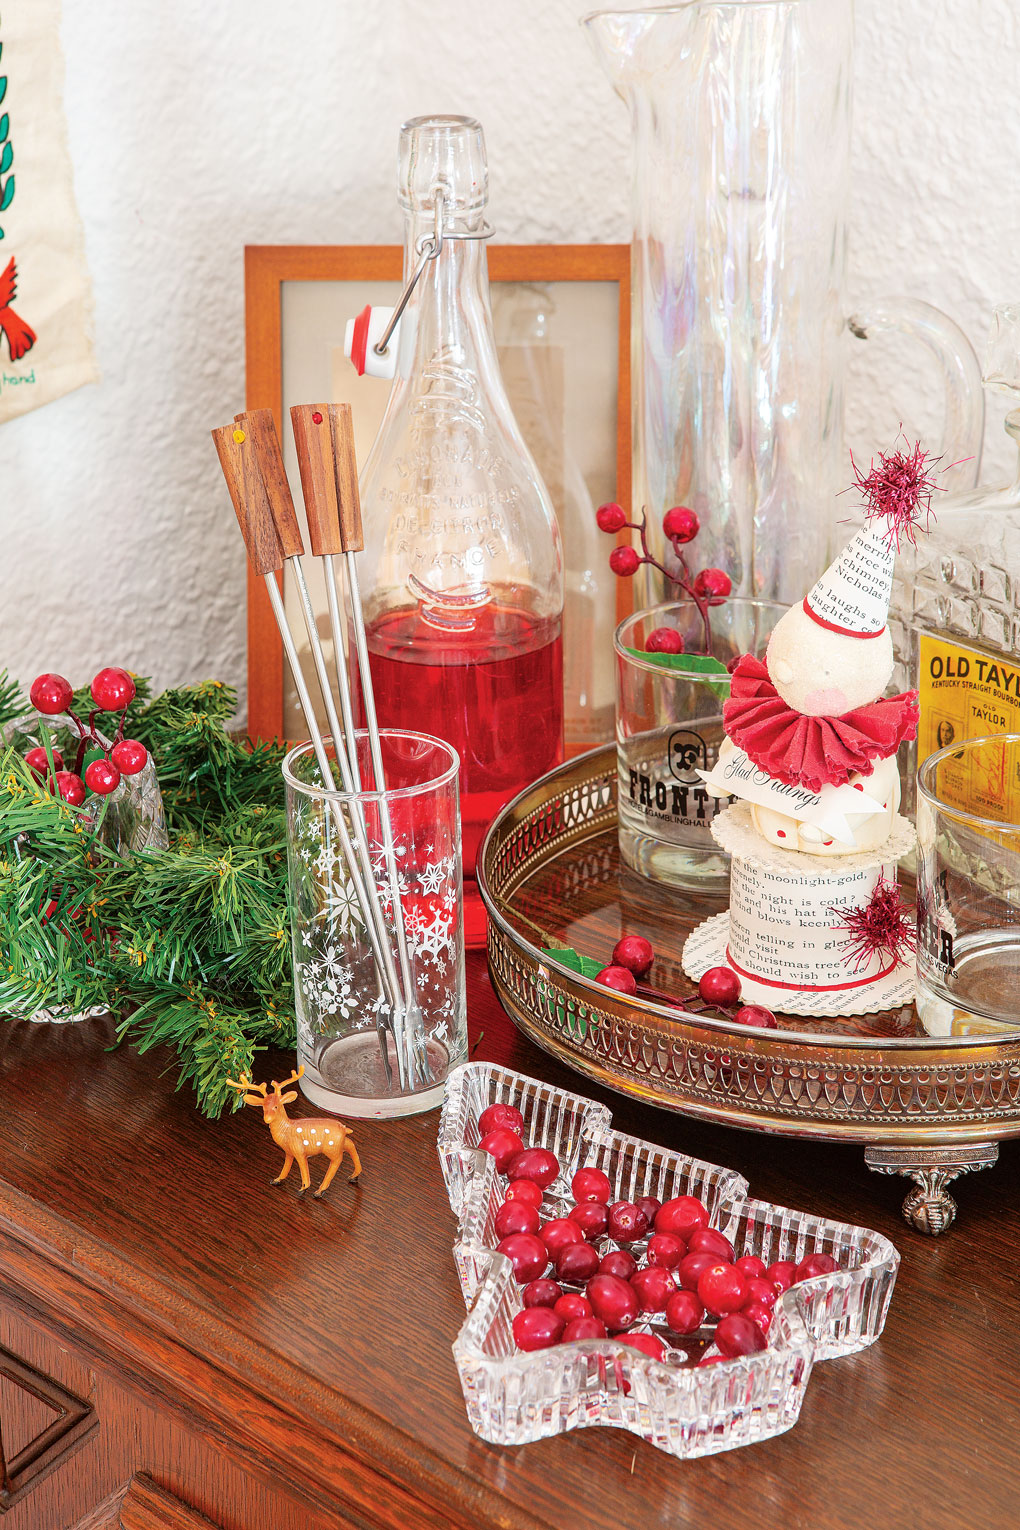 A vintage inspired drink station, decanters, stir sticks and a crystal candy dish with red candies. 